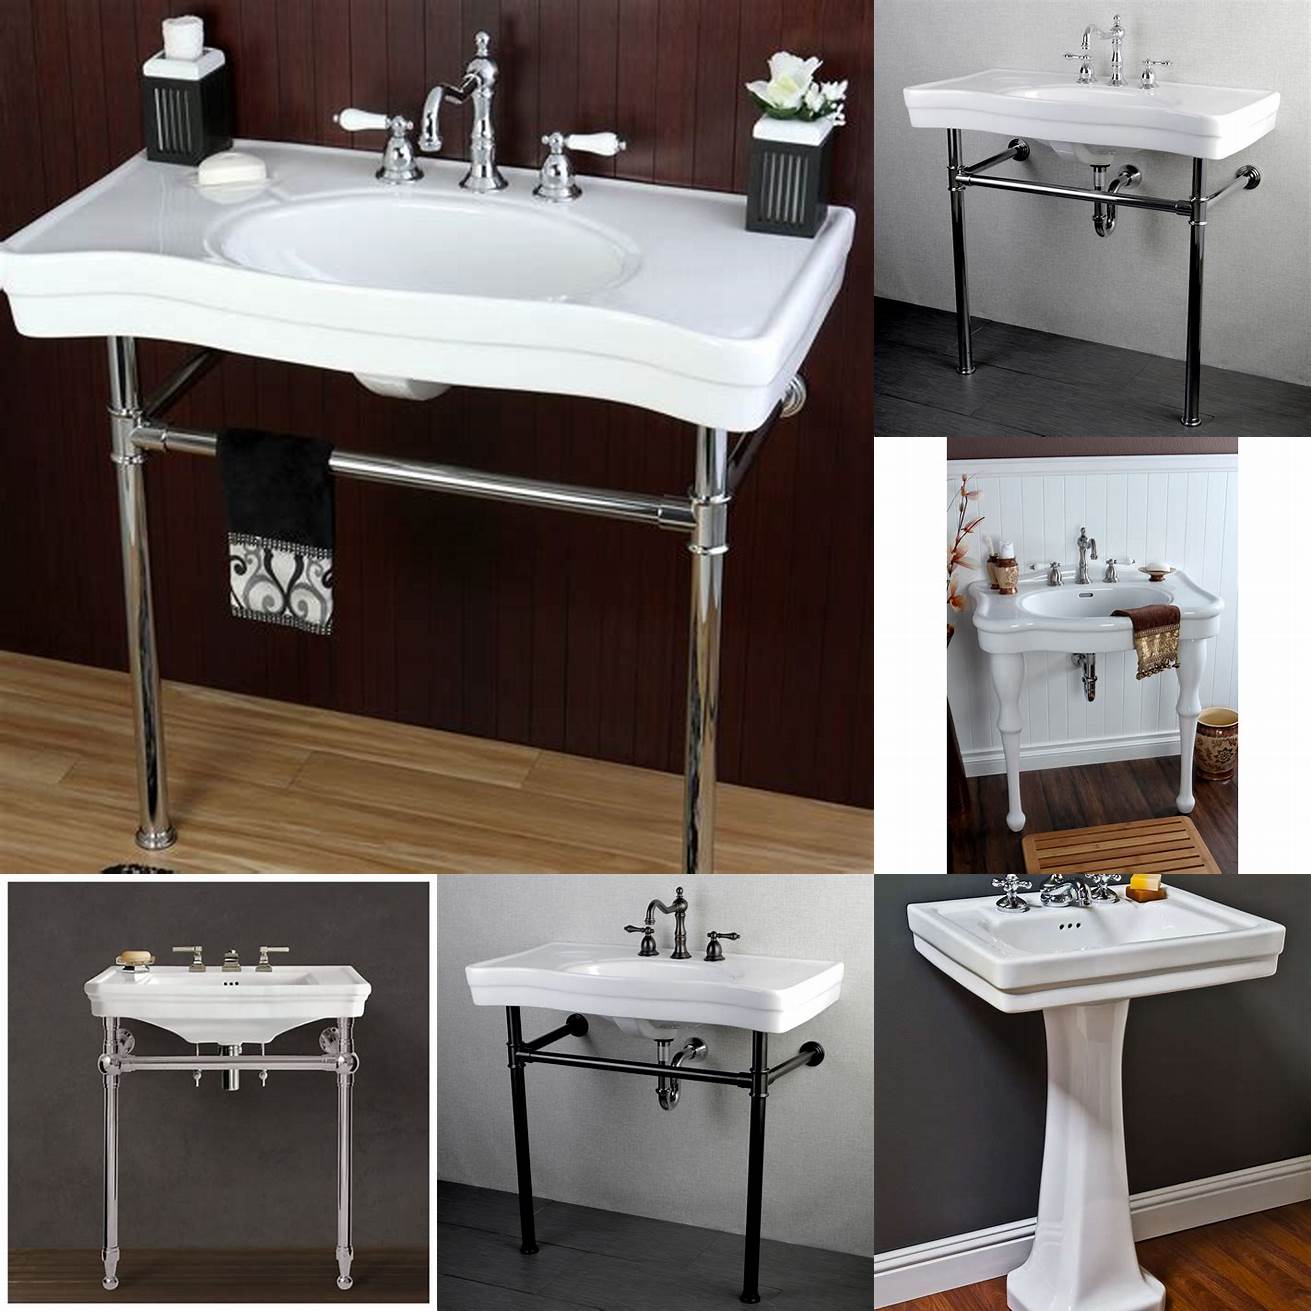 A vintage-inspired vanity with a pedestal sink and chrome legs